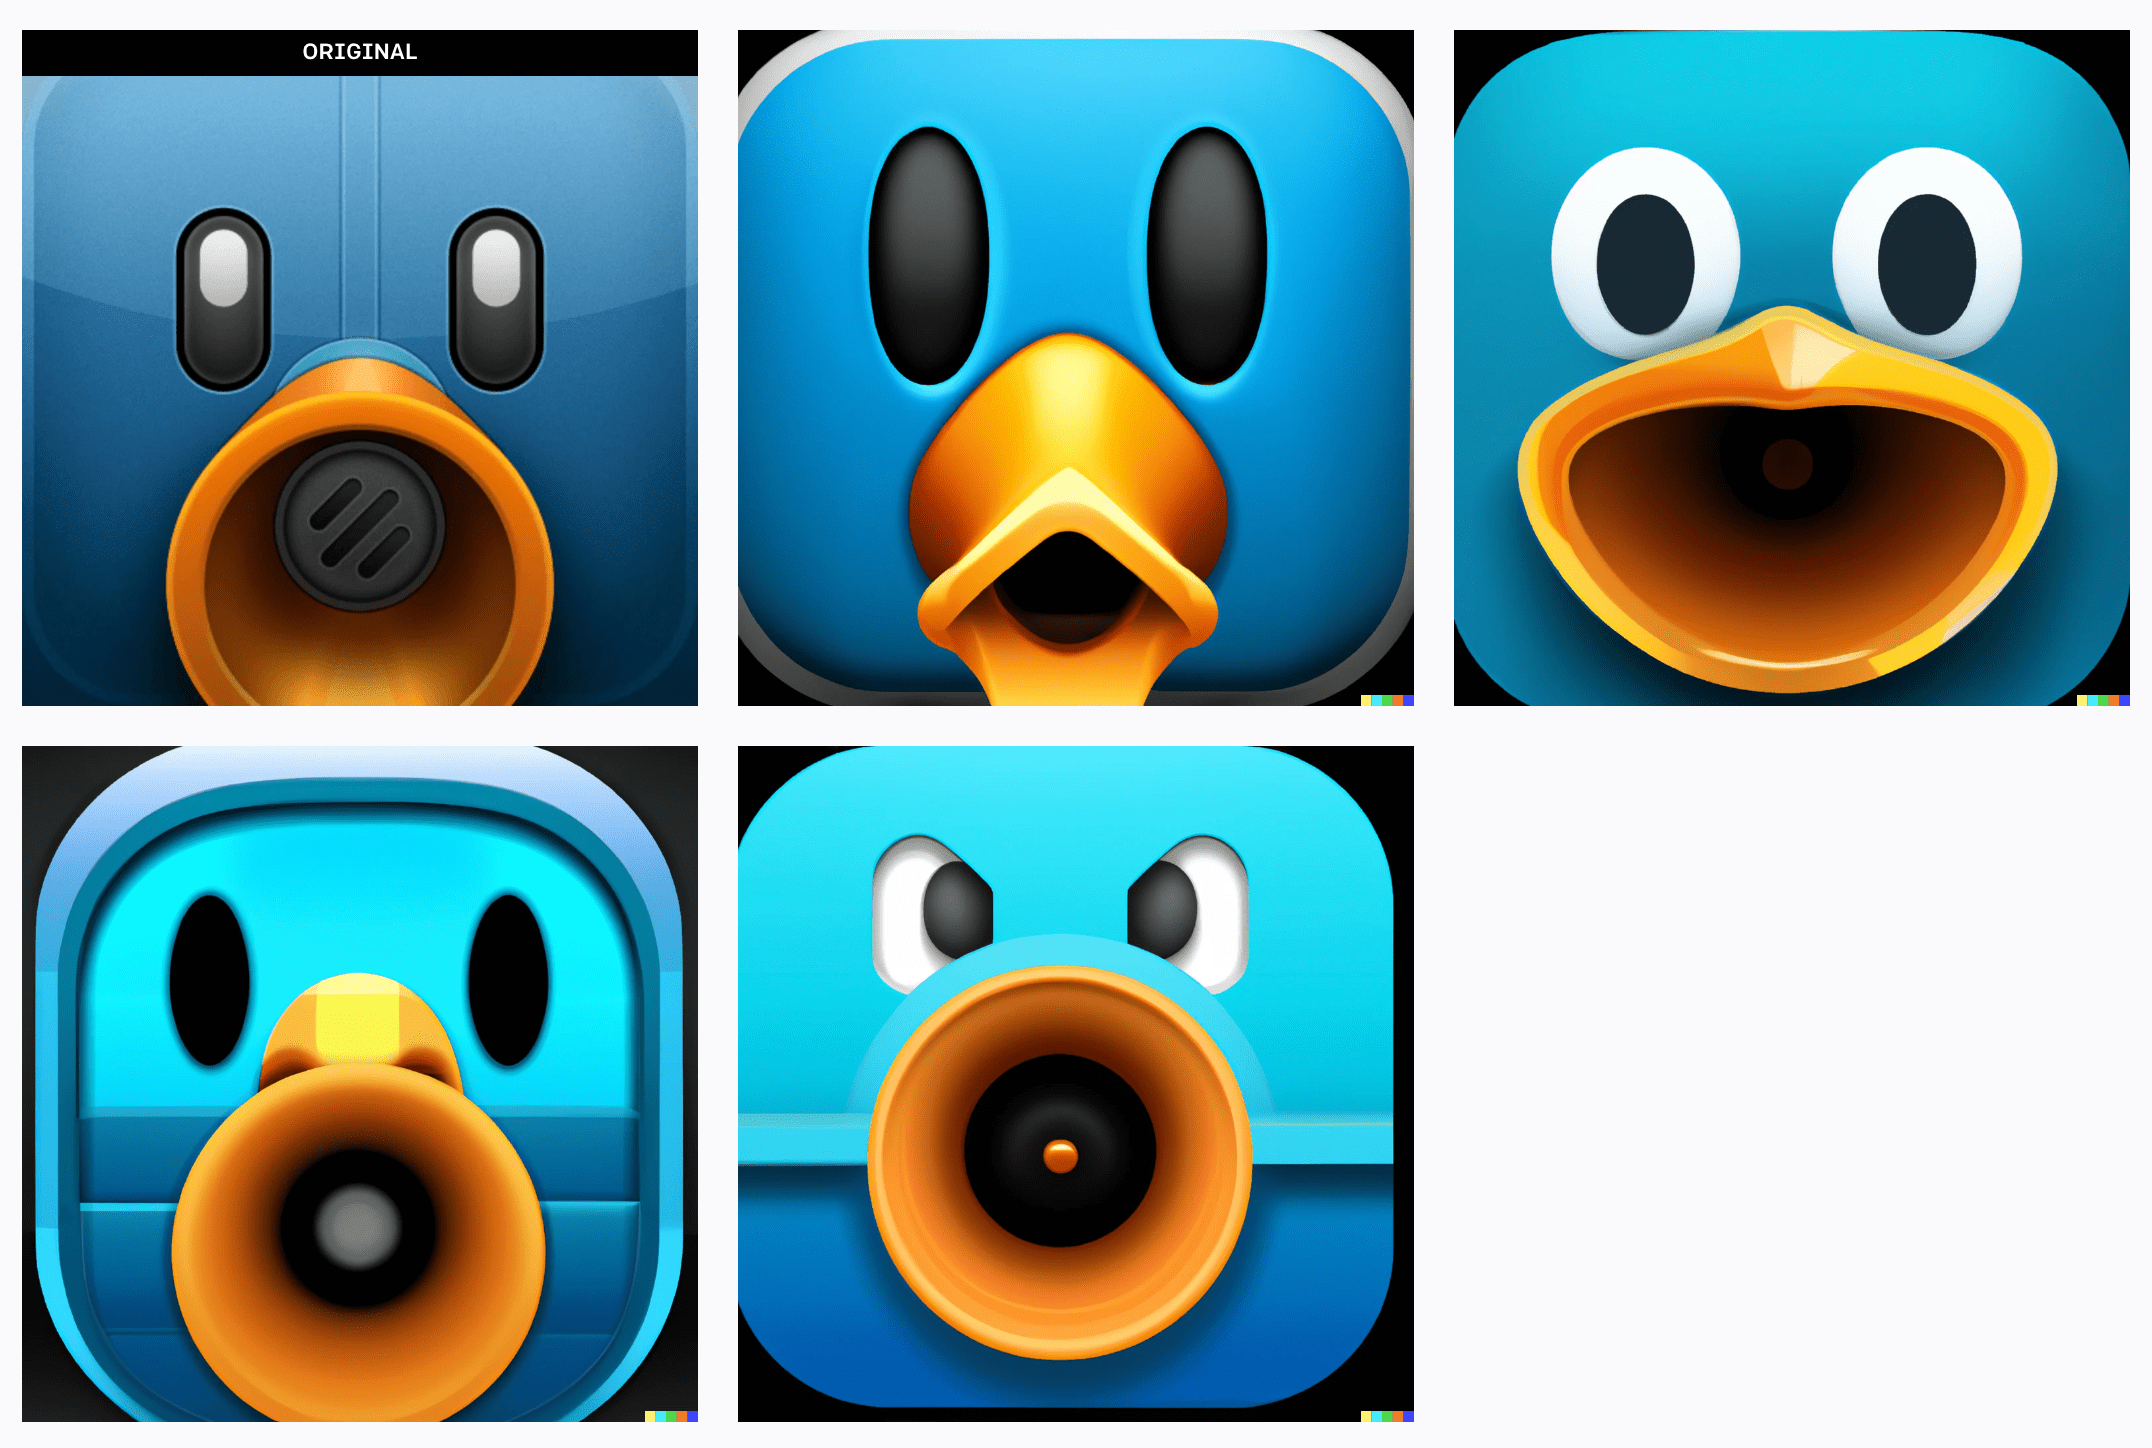 The original “Tweetbot” app icon with 4 AI-generated variations alongside it.